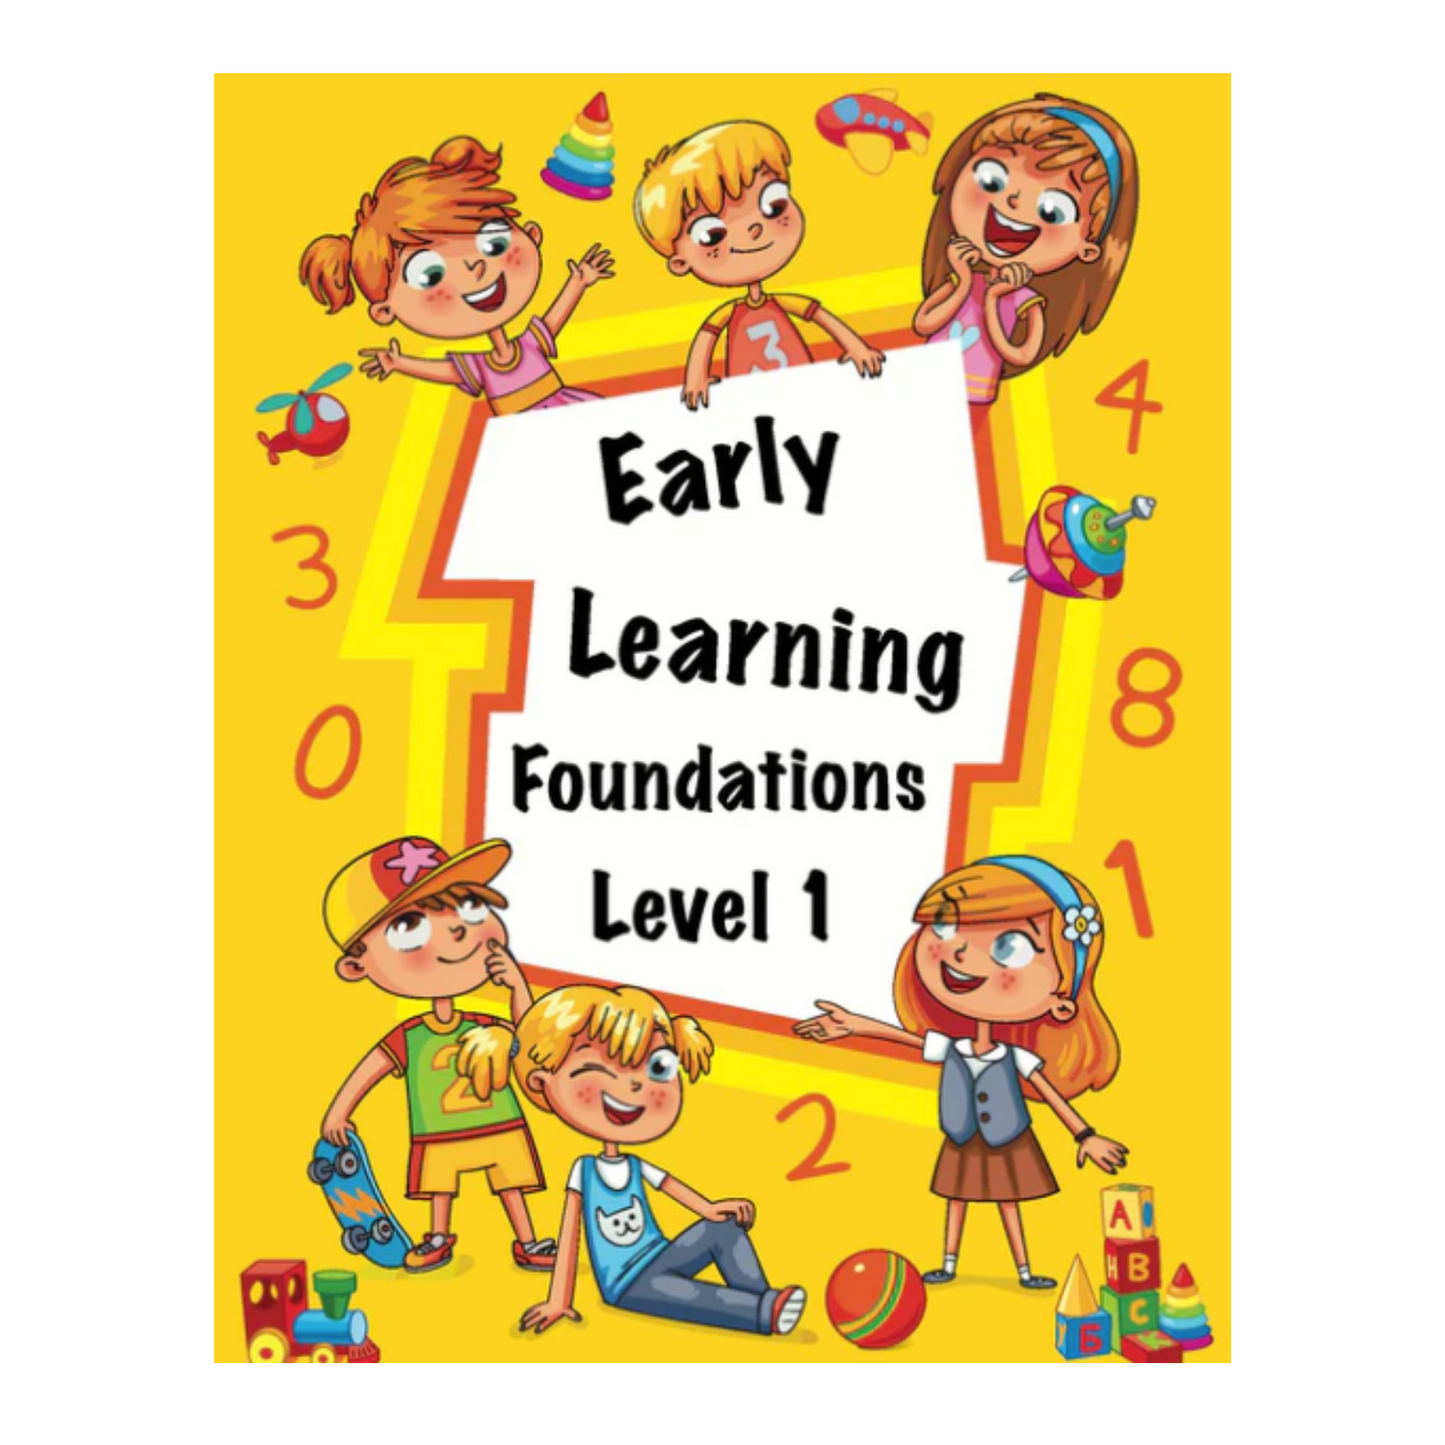 Early Learning Foundations Level 1